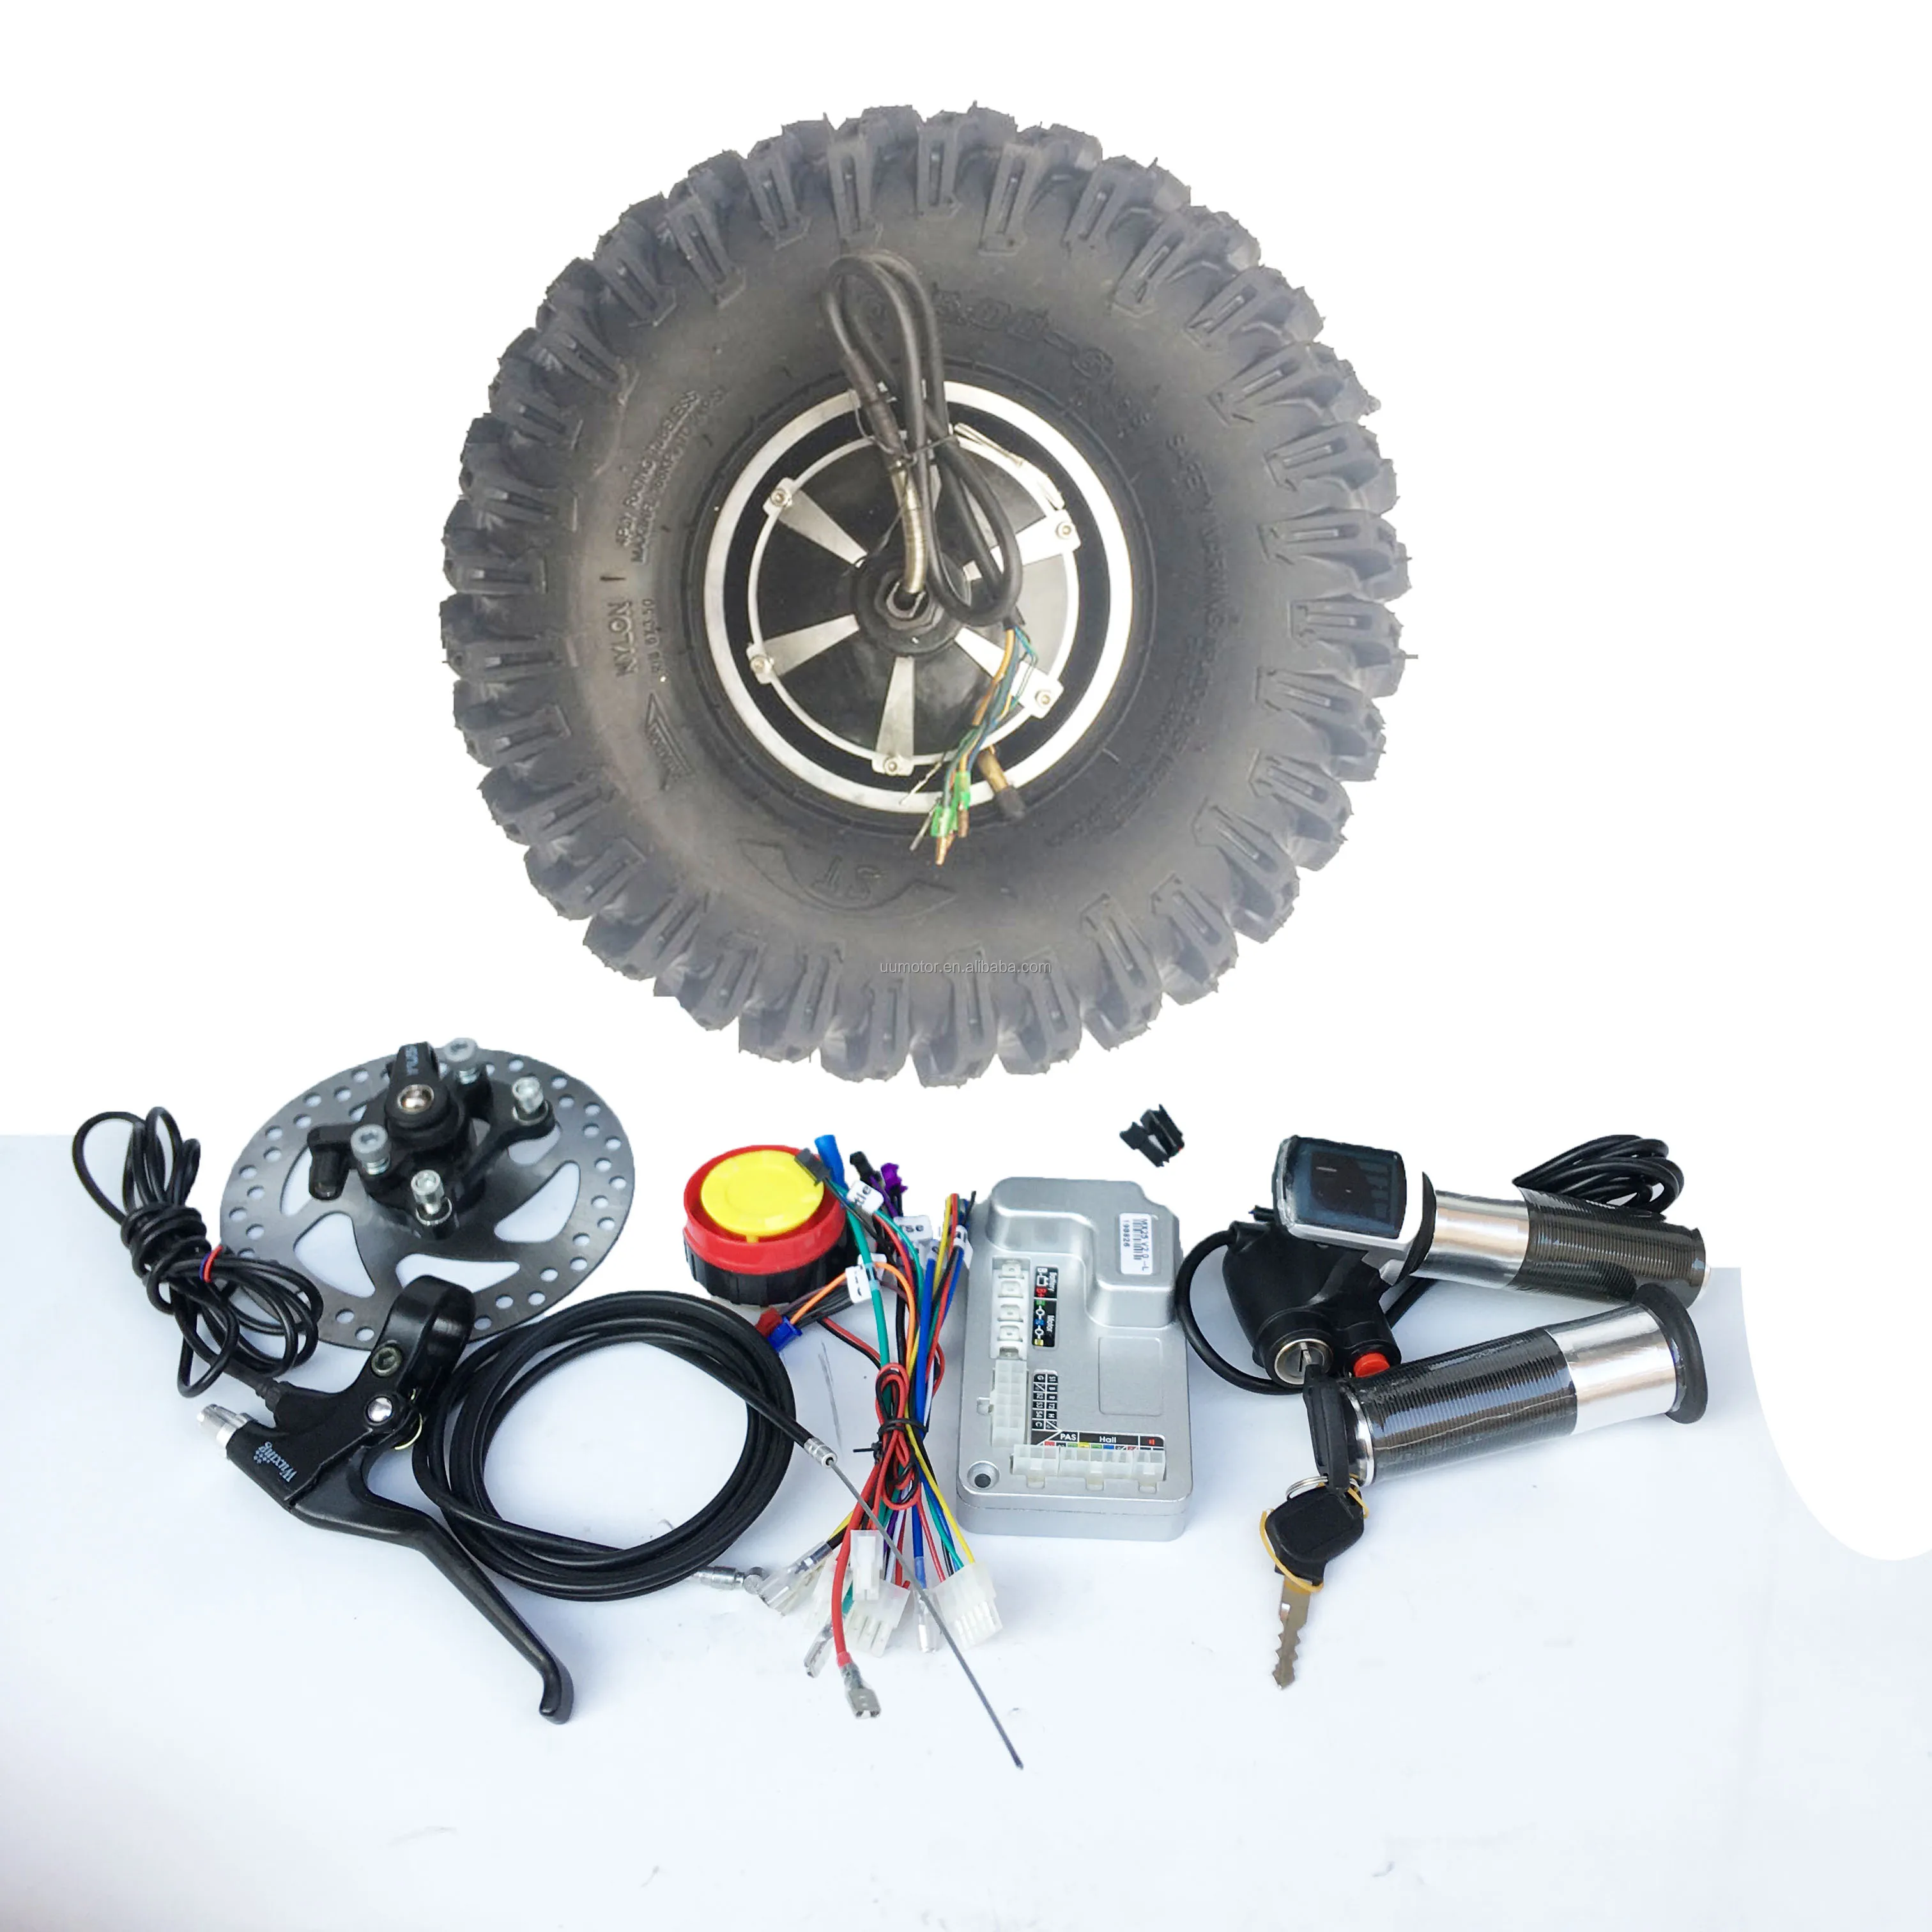 

15 inch off road tire battery powered trolley 36v 500w electric wheelbarrow conversion kit